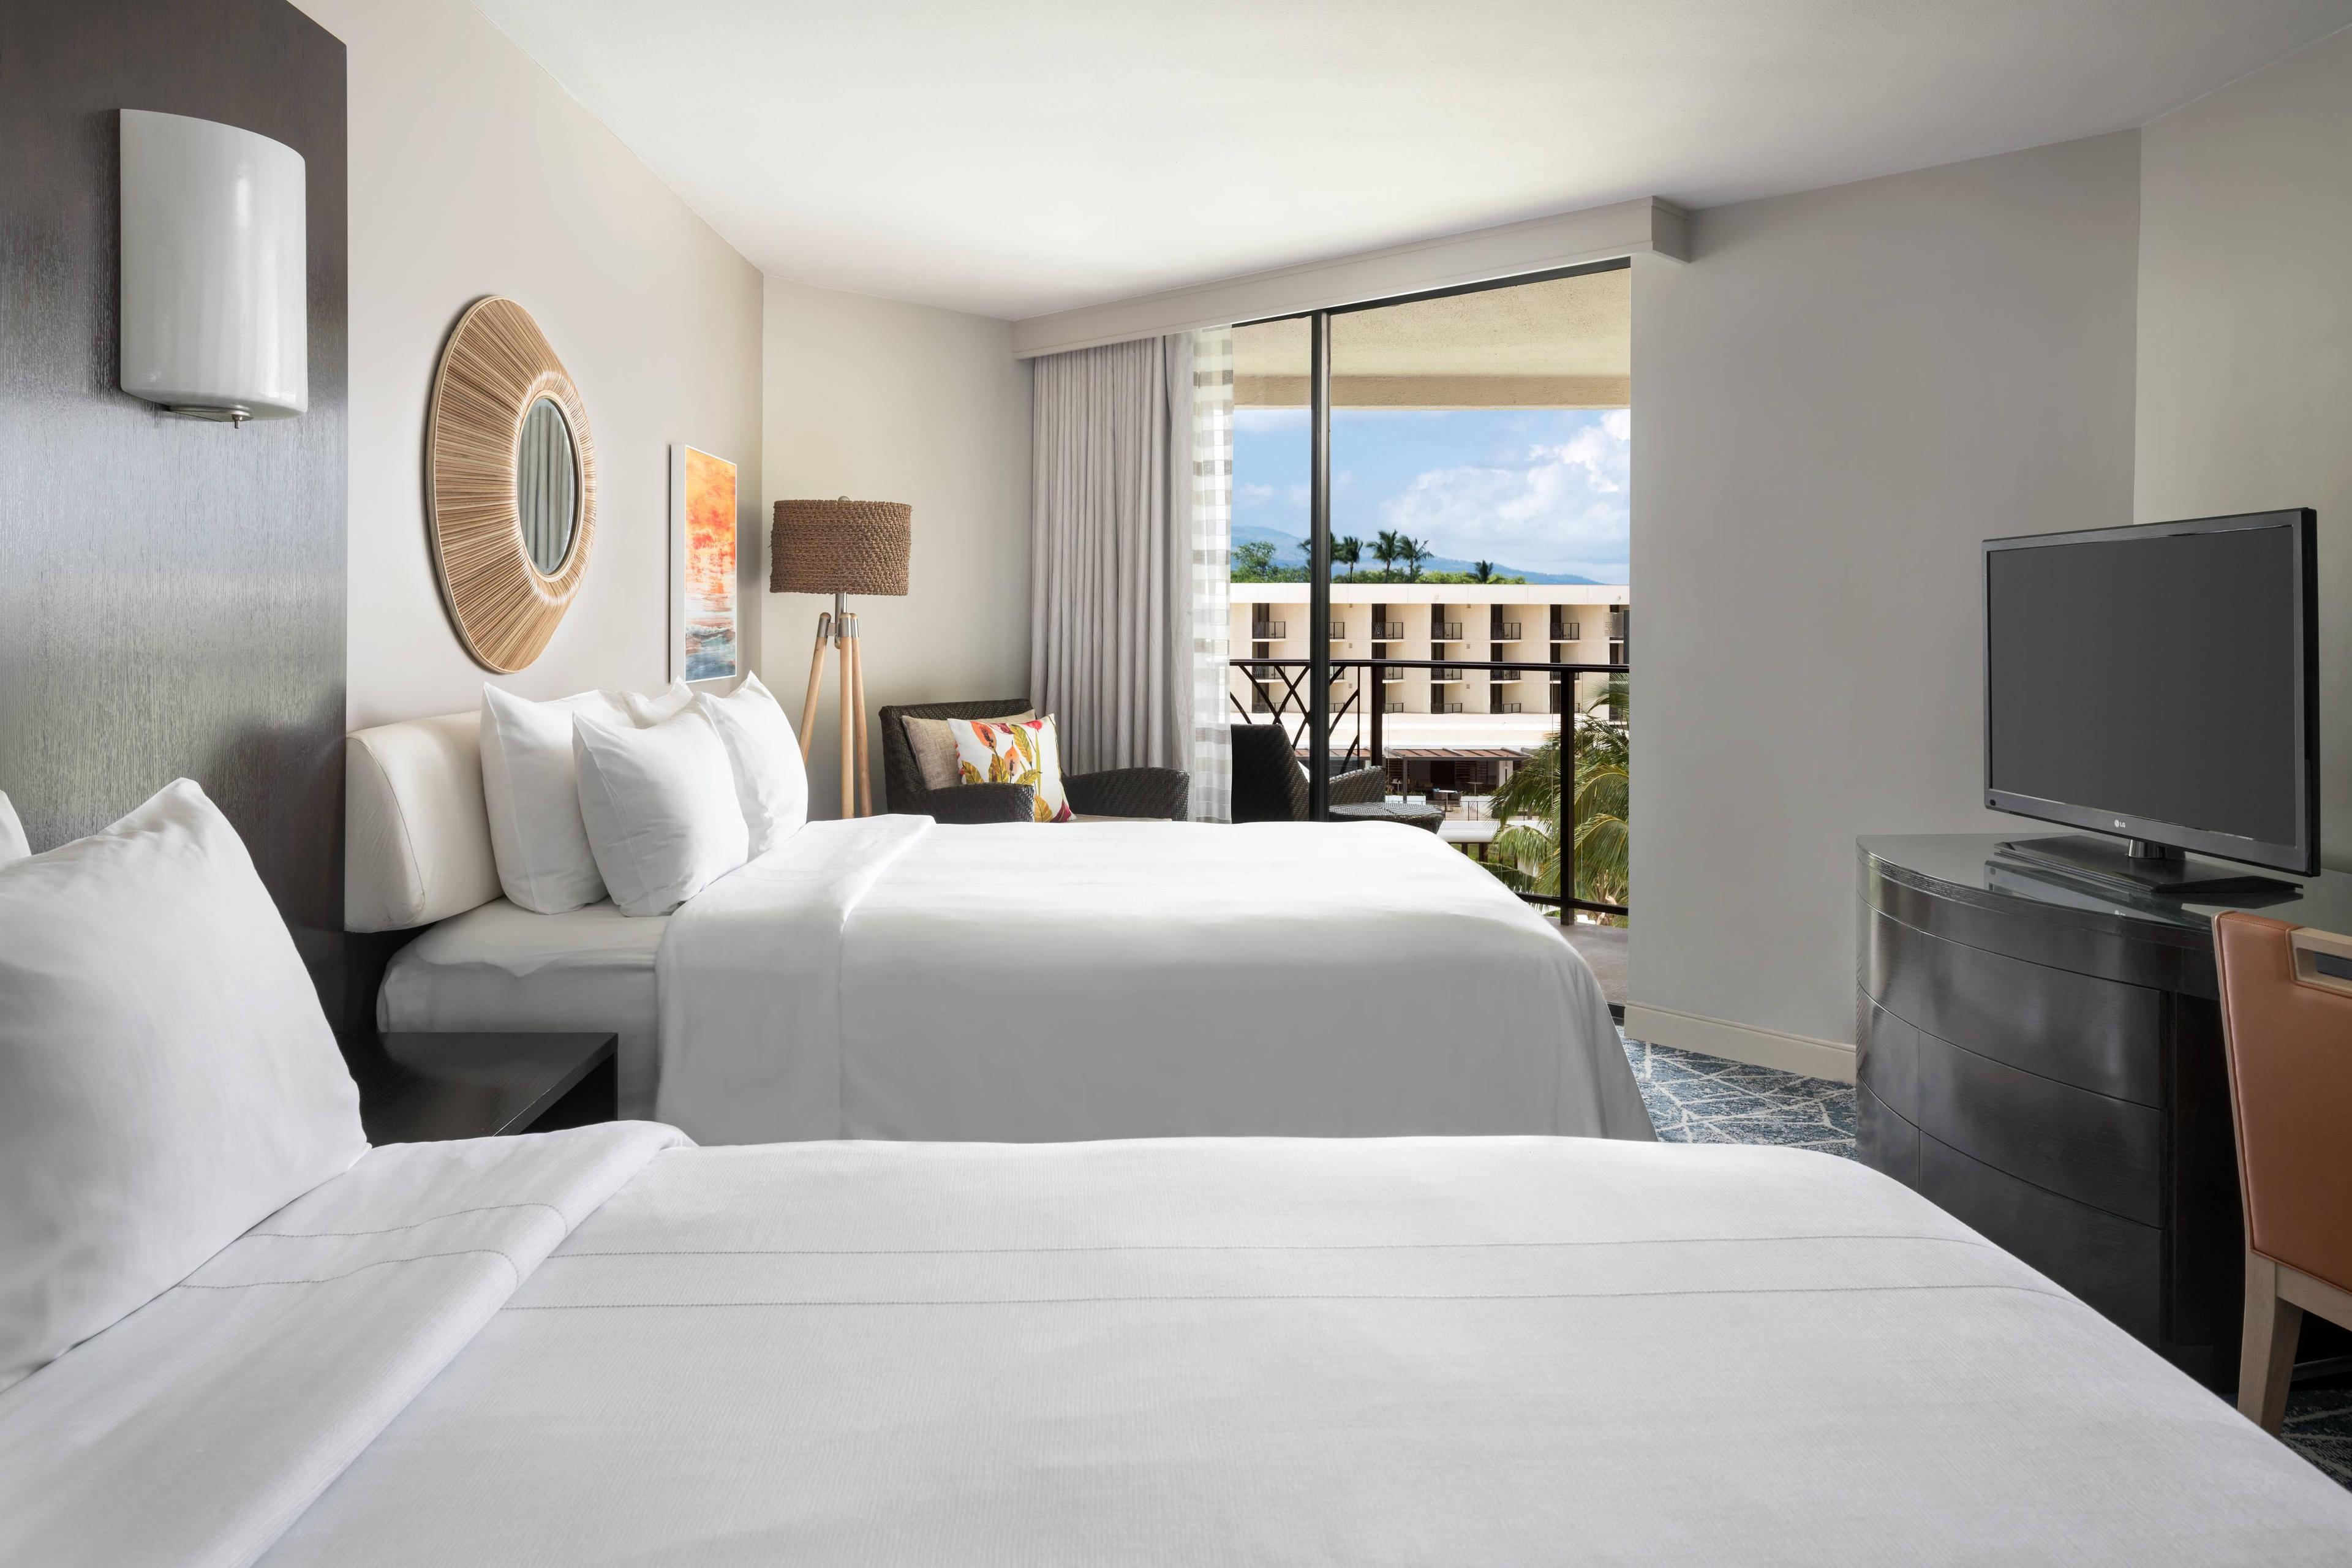 Enjoy a good night's sleep after enjoying a day on the islands in our guest rooms that feature comfy bedding, plush pillows and a balcony for enjoying the view.